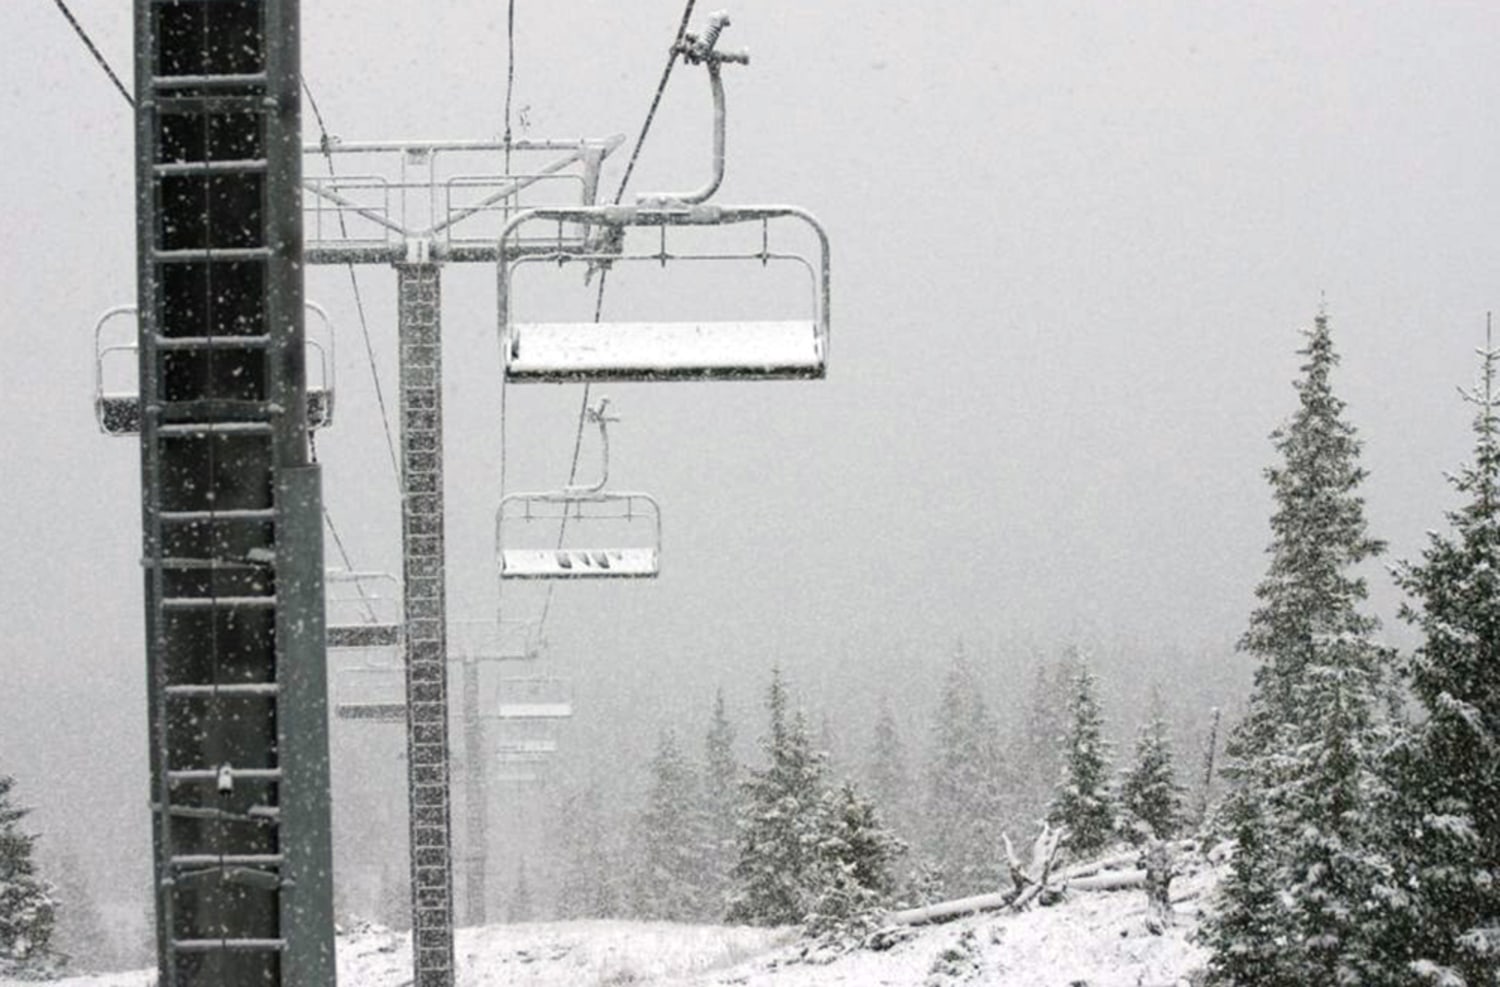 A Colorado Ski Area With No Lift Lines? This One Has No Lifts at All. - The  New York Times